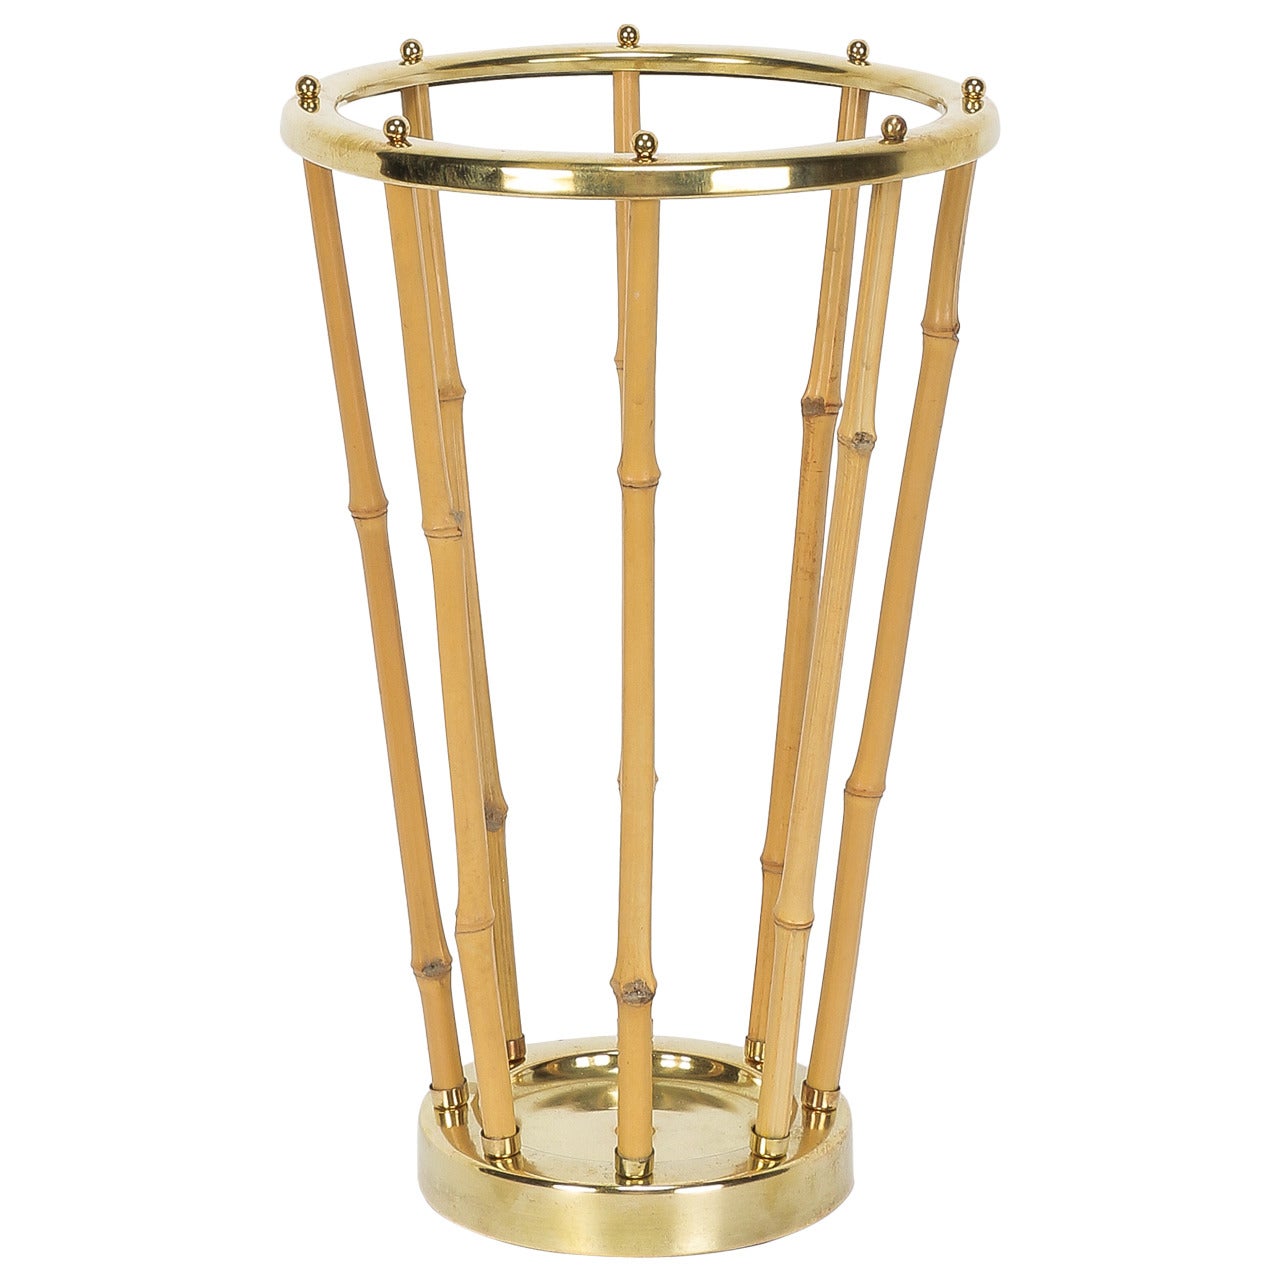 Bamboo and Brass Umbrella Stand in the Style of Carl Auböck, 1950s For Sale